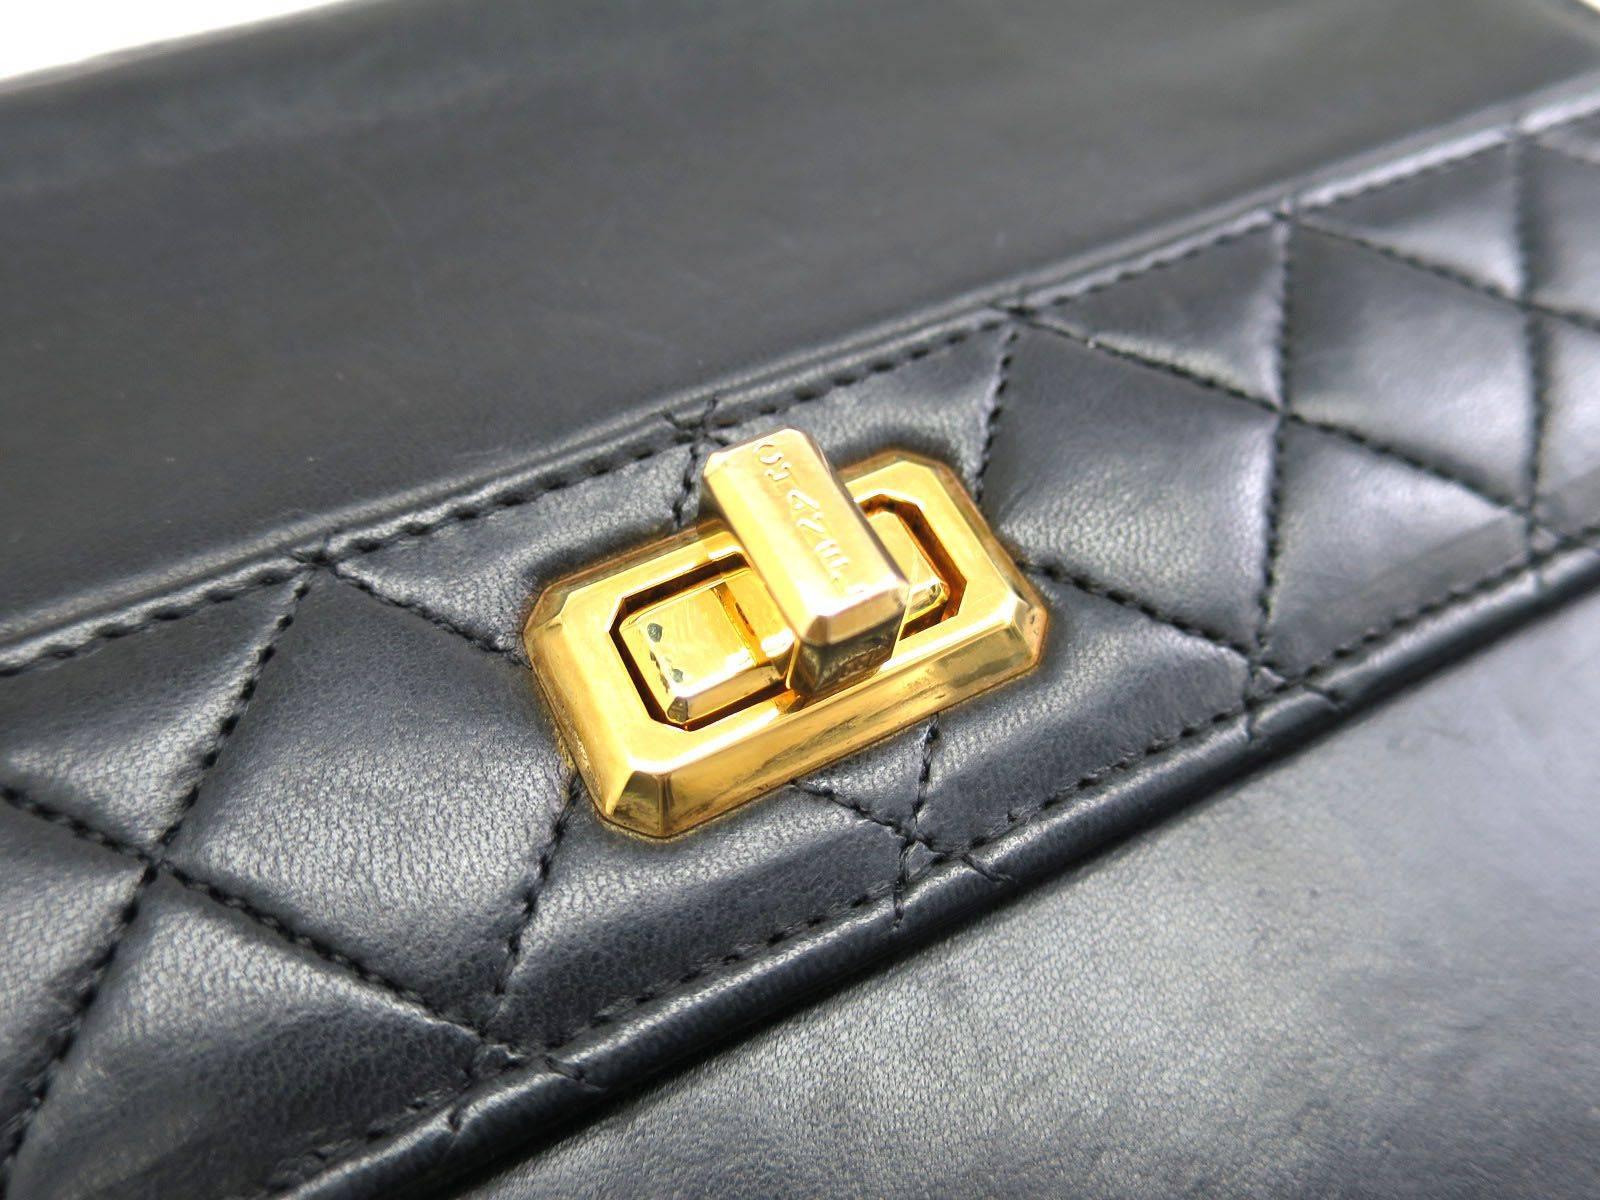 CURATOR'S NOTES

Kelly bag lovers relish this stunning Chanel lambskin leather Kelly-style box shoulder bag featuring gold chain and interlocking CC at front closure.

Lambskin
Gold hardware
Turnlock closure
Made in France
Measures 9.3